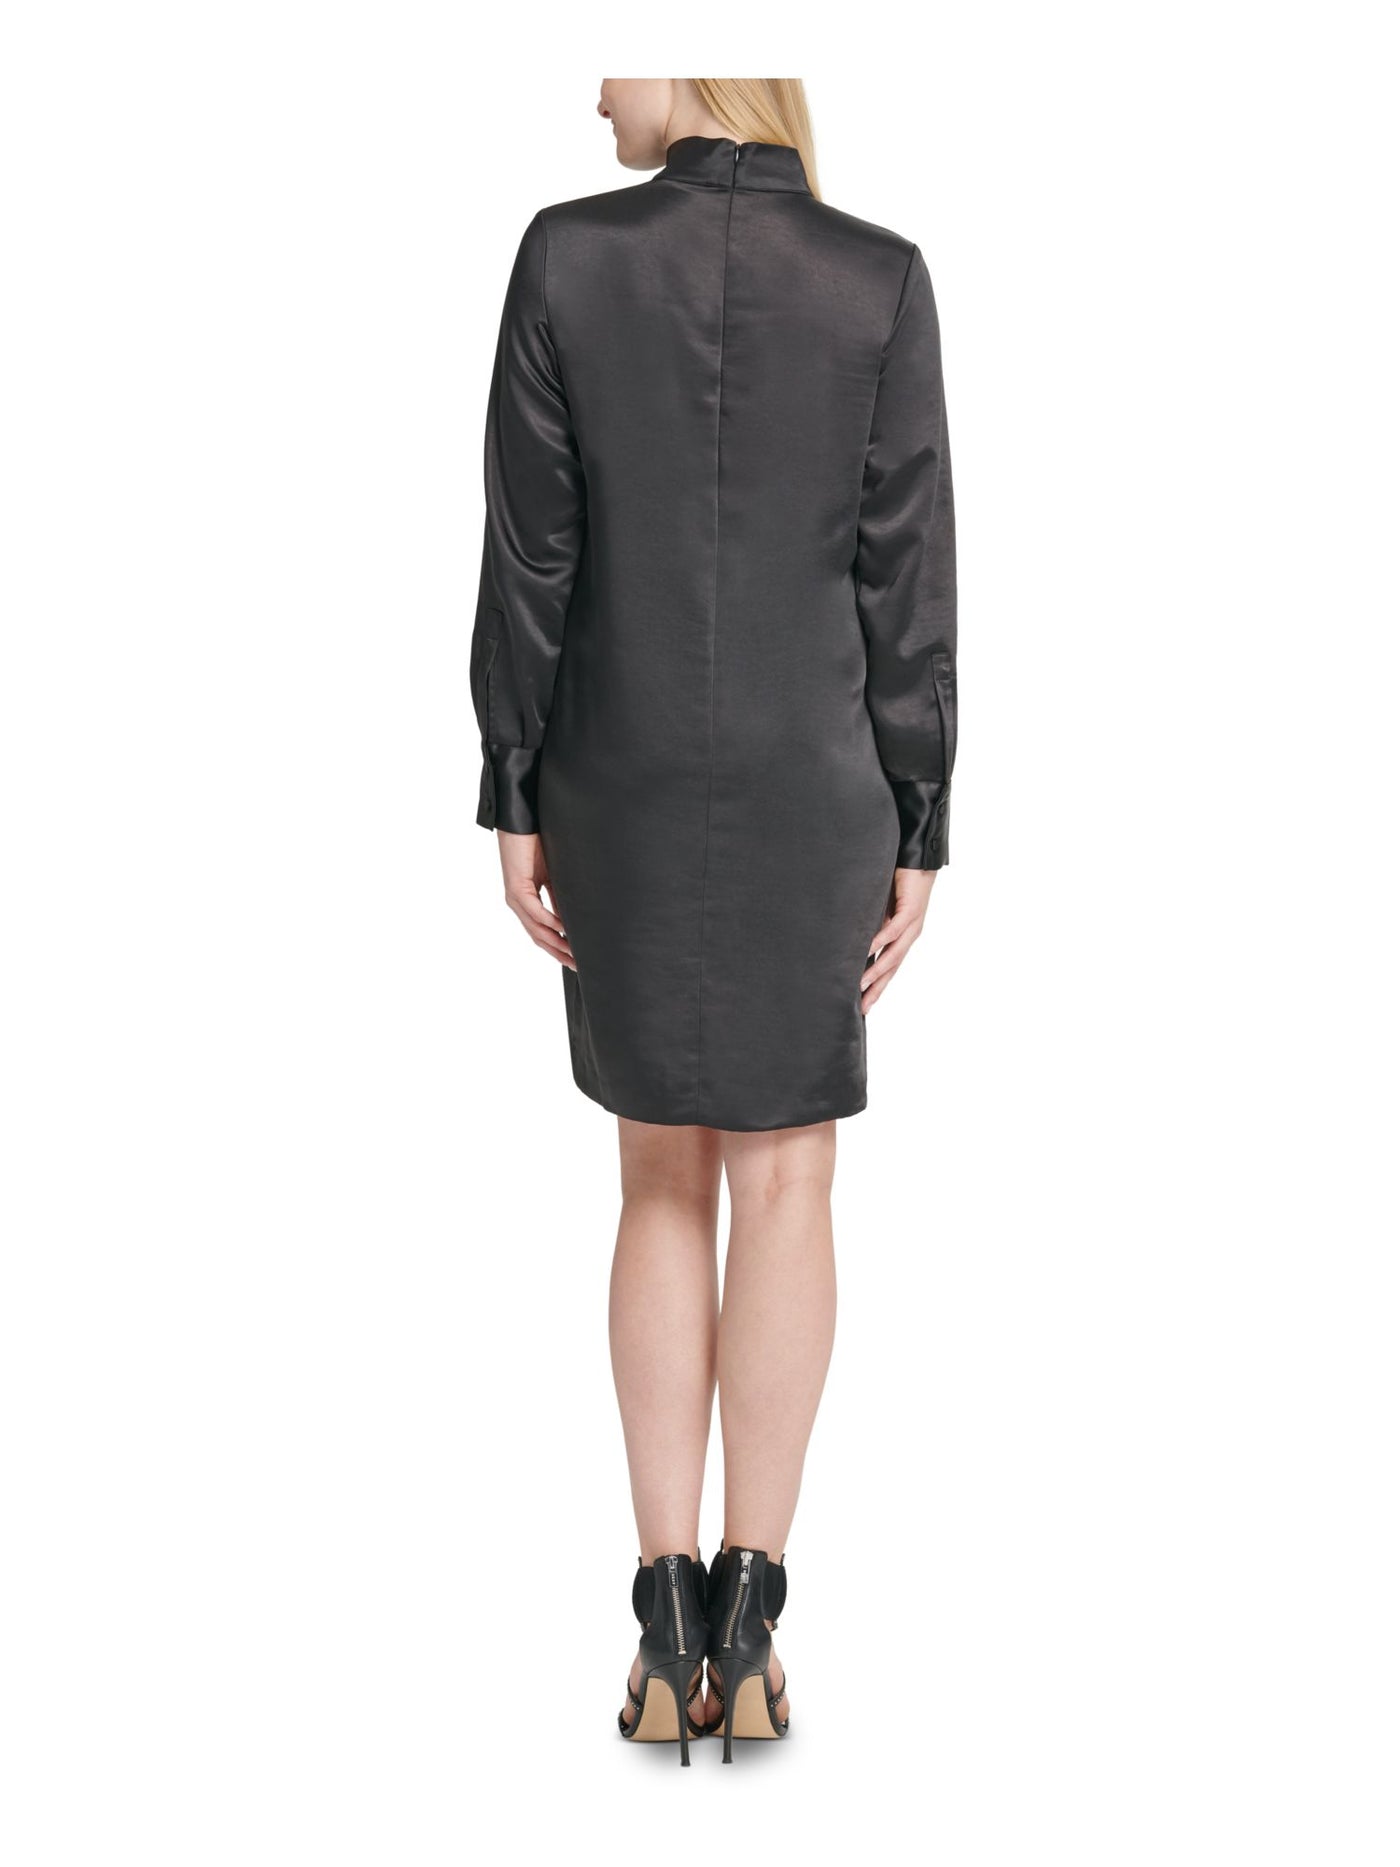 DKNY Womens Long Sleeve Turtle Neck Above The Knee Cocktail Body Con Dress